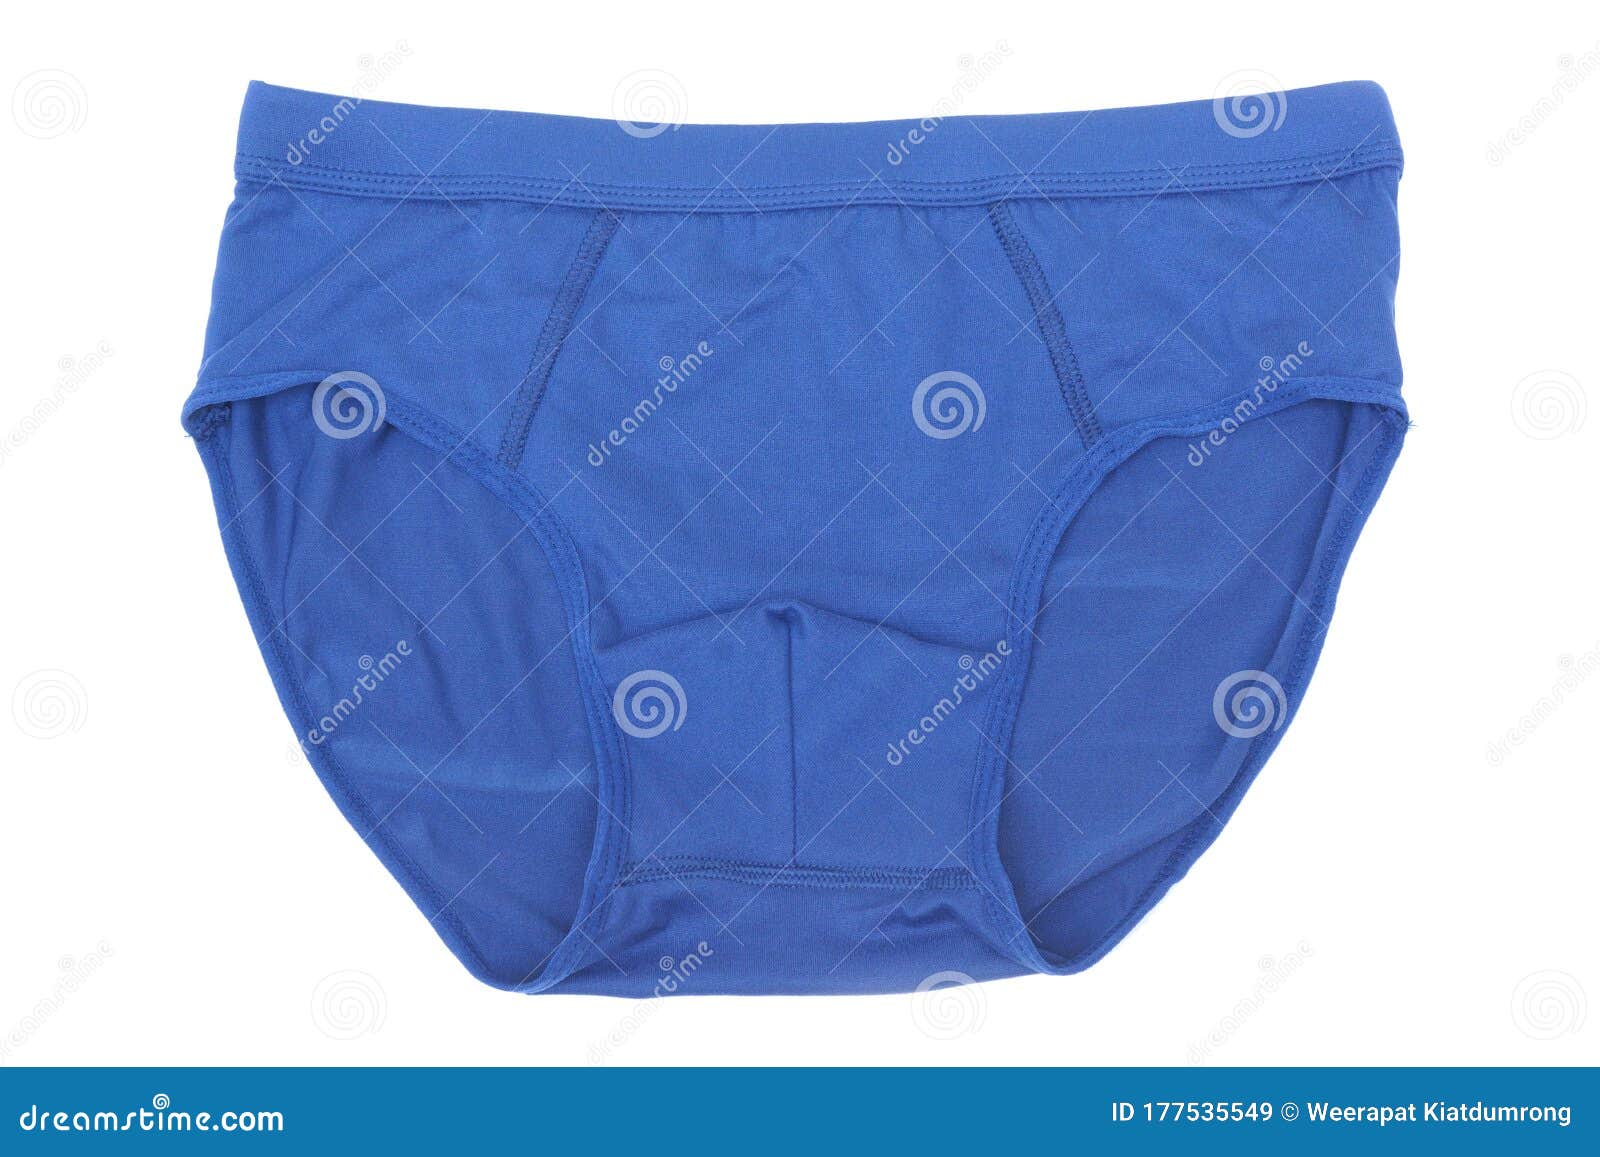 Male Underwear in Blue Color Stock Image - Image of cloth, mens: 177535549